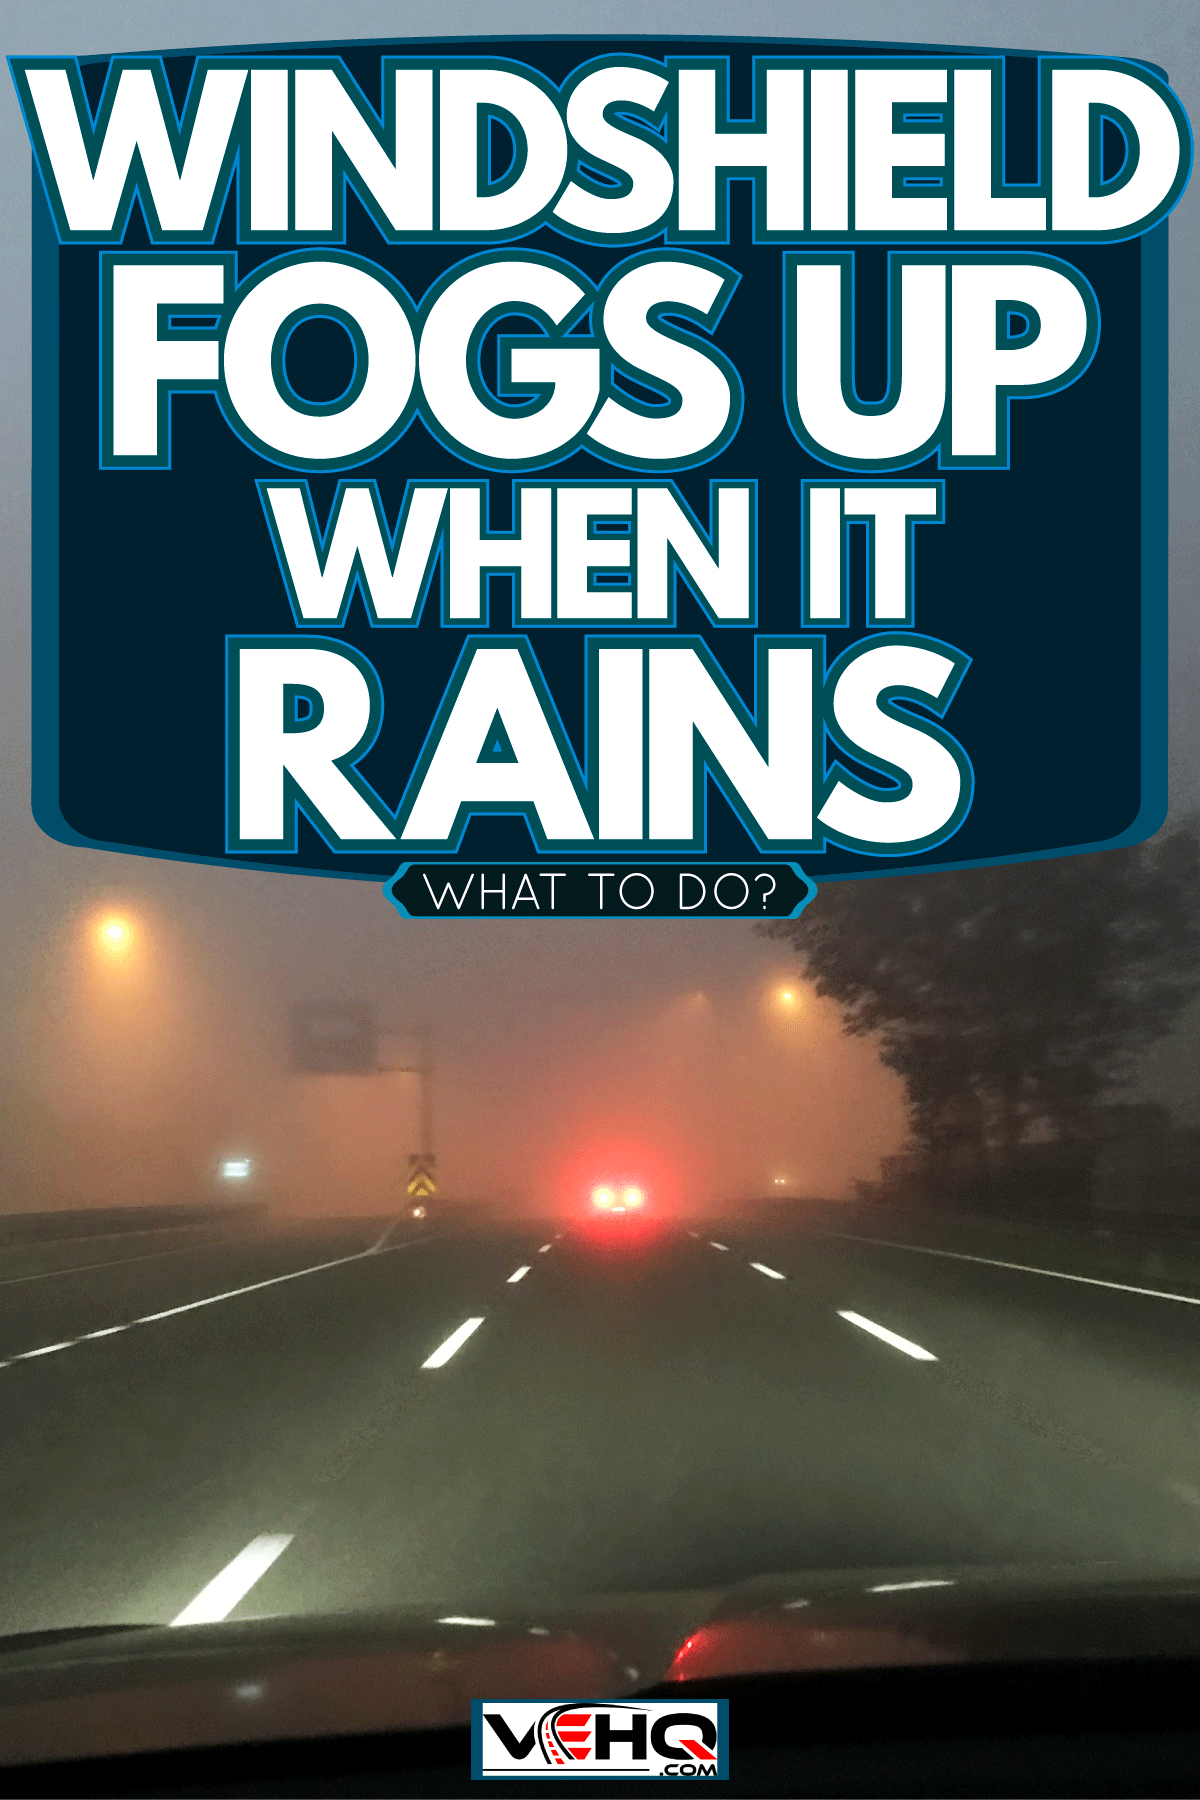 Car windshield all fogged up due to cold weather, Windshield Fogs Up When It Rains - What To Do?